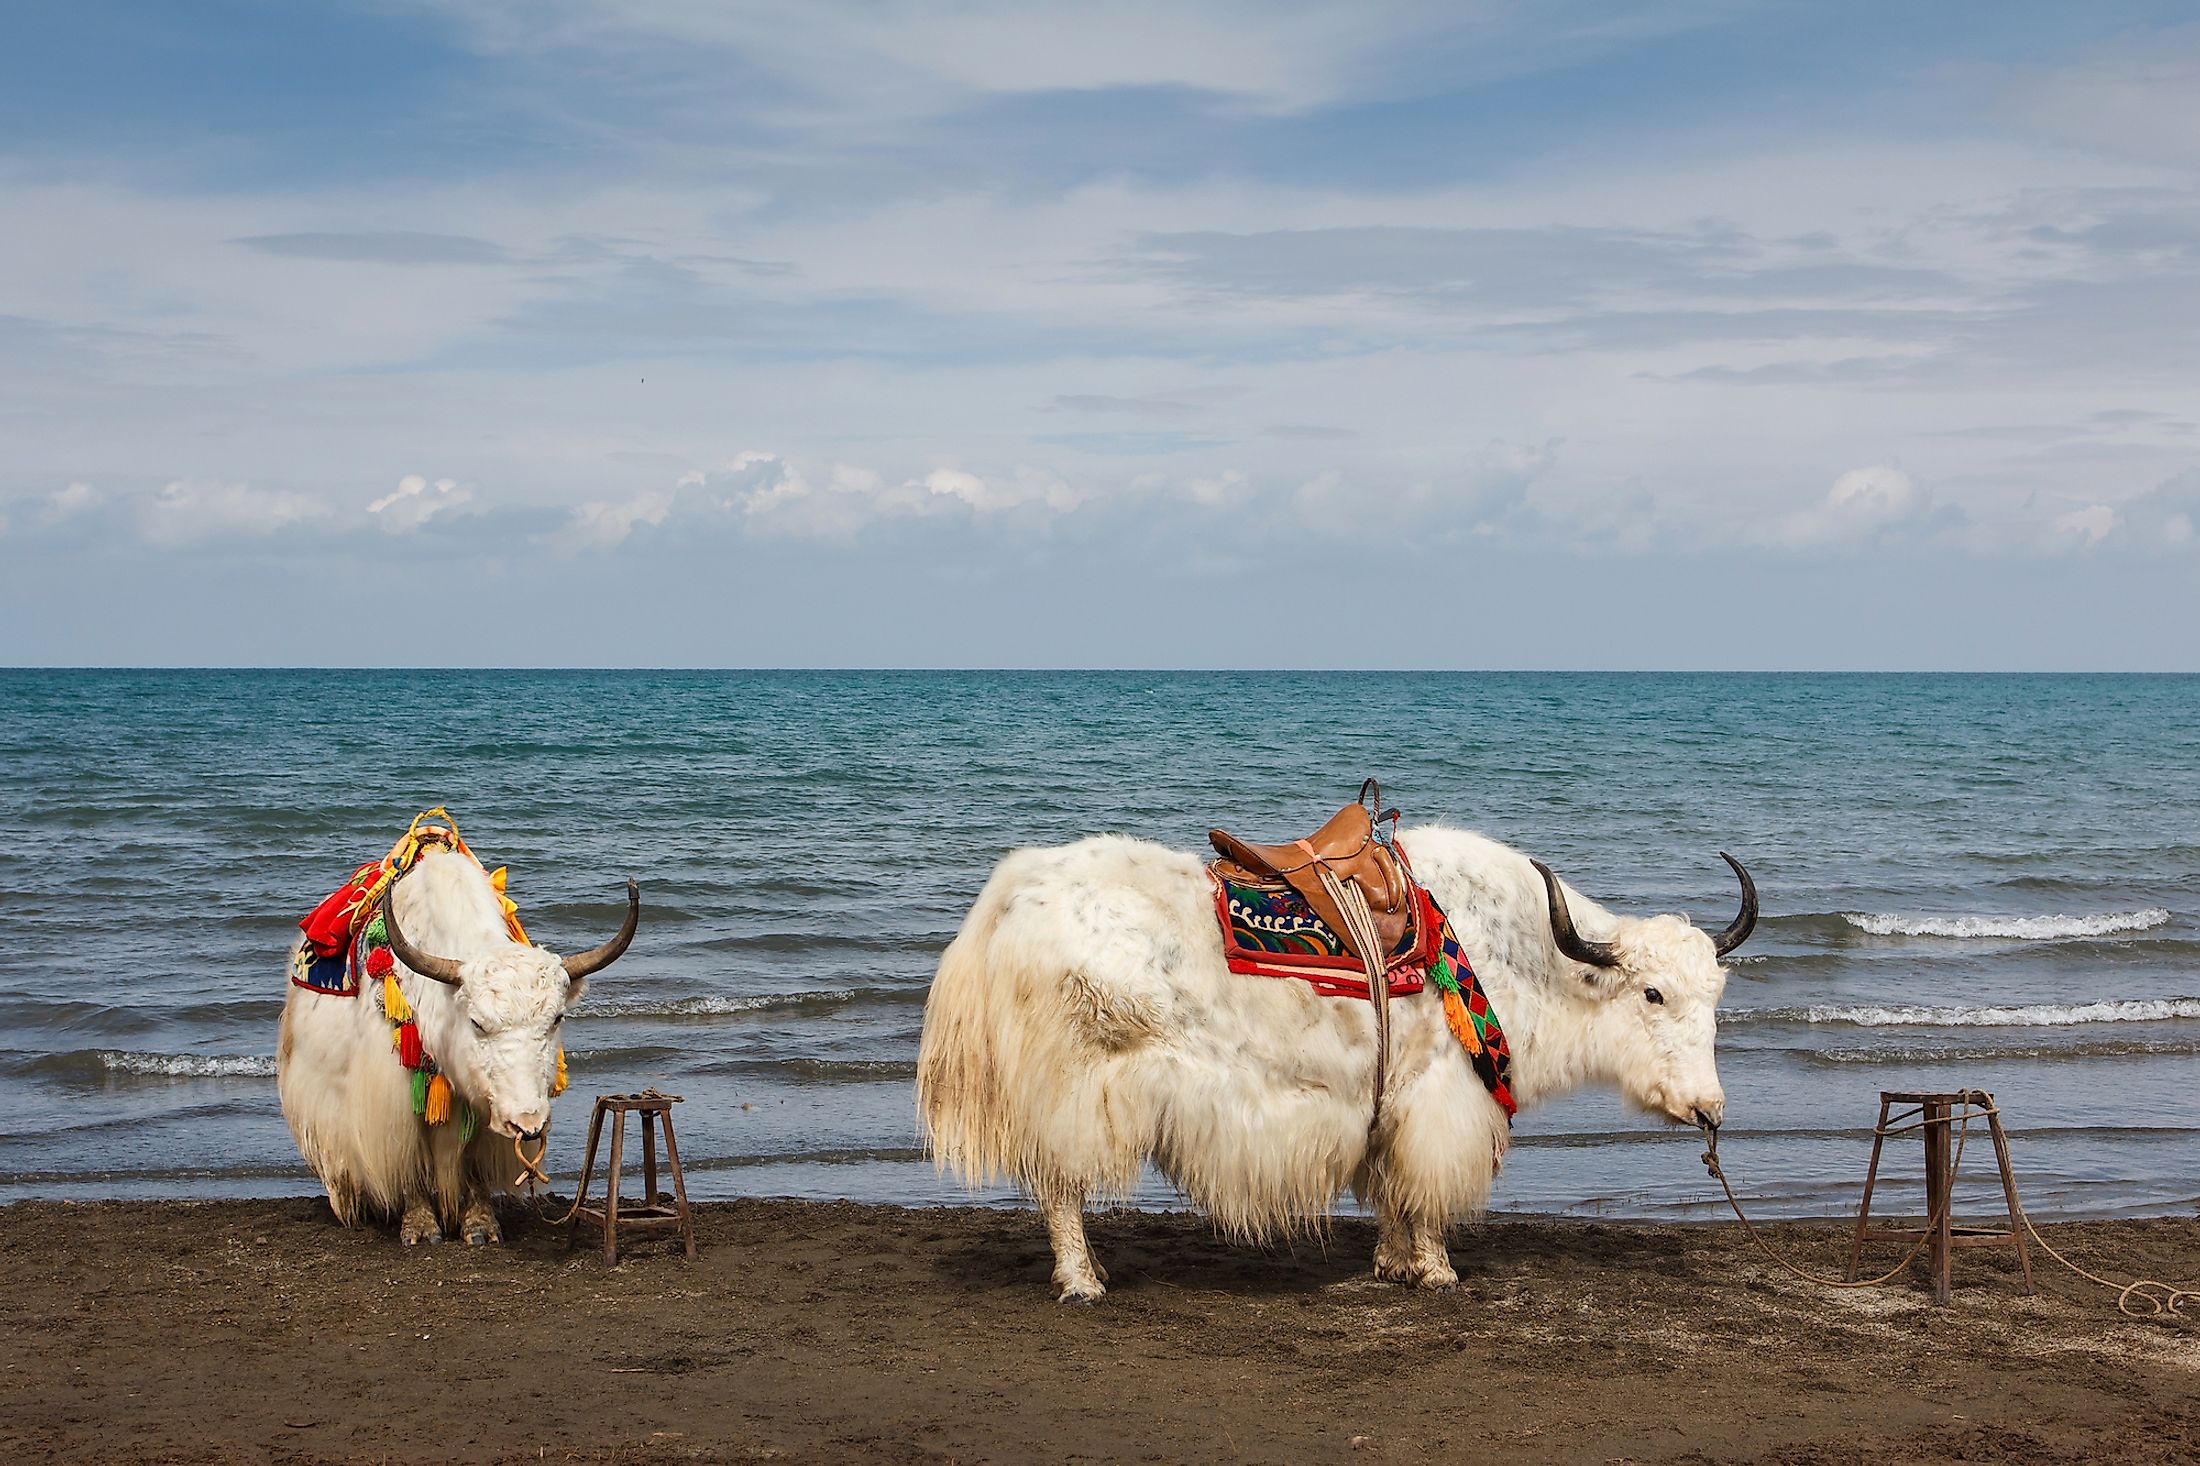 Yaks by the shores of the Qinghai Lake in China